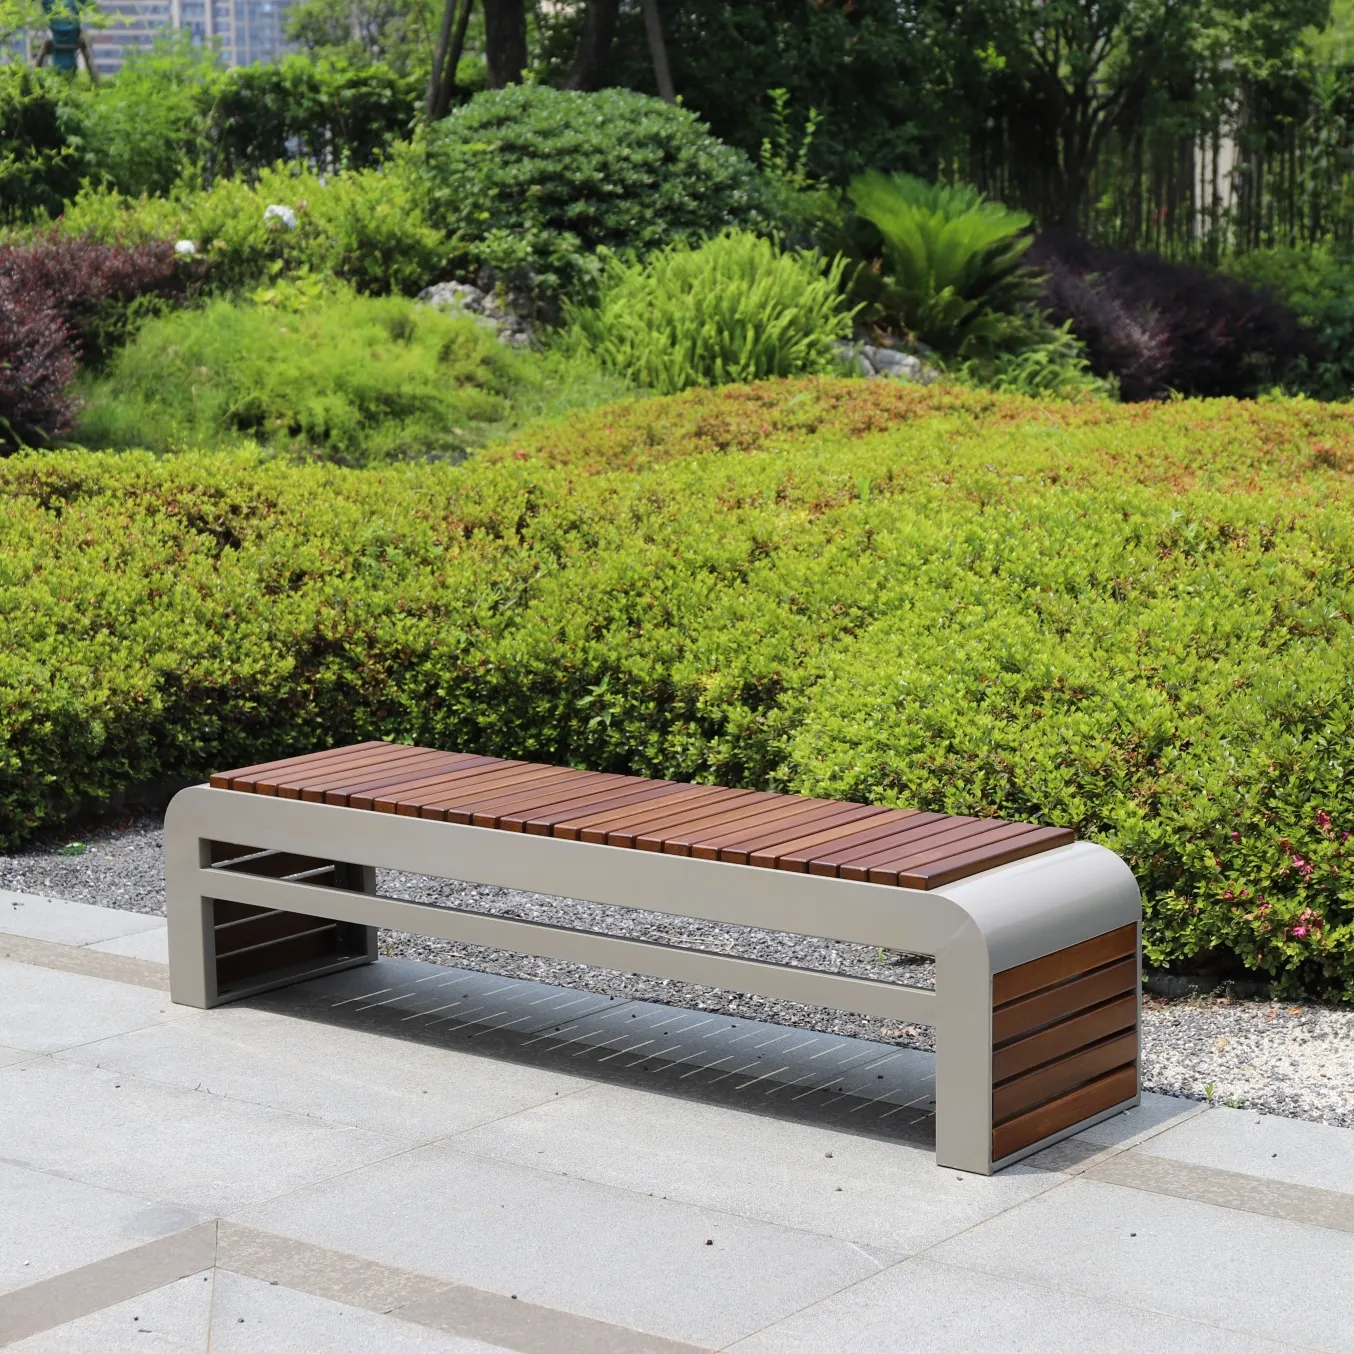 black outdoor public city furniture metal waiting seat wooden urban bench for parks and plazas